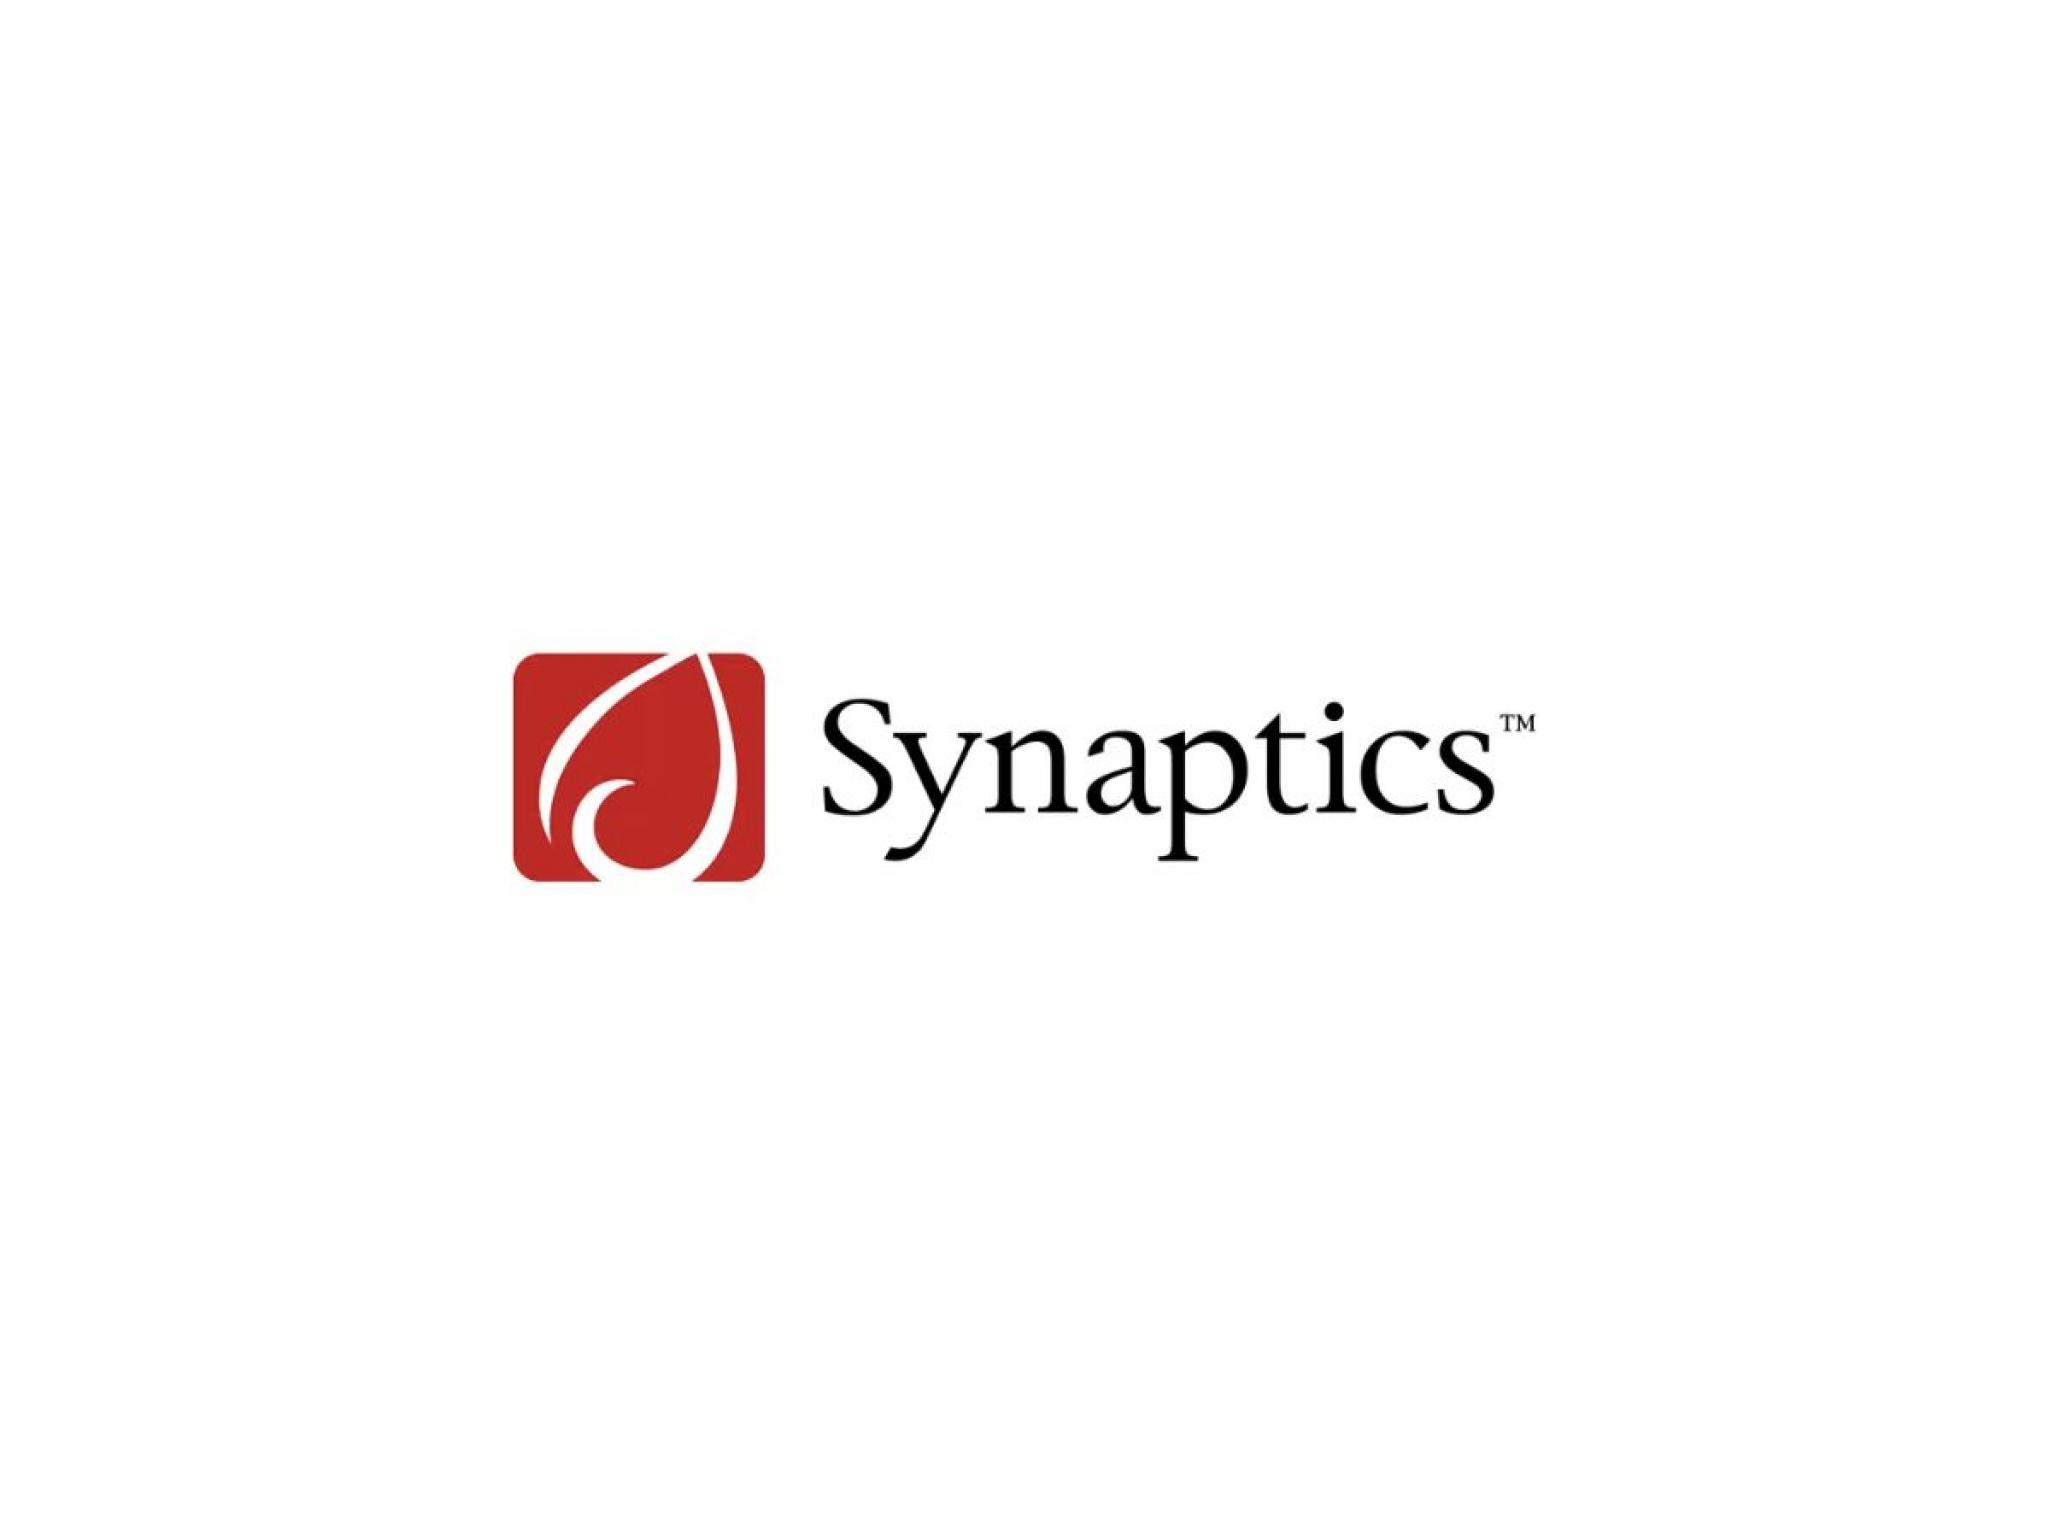  why-synaptics-shares-are-trading-lower-by-17-here-are-other-stocks-moving-in-thursdays-mid-day-session 